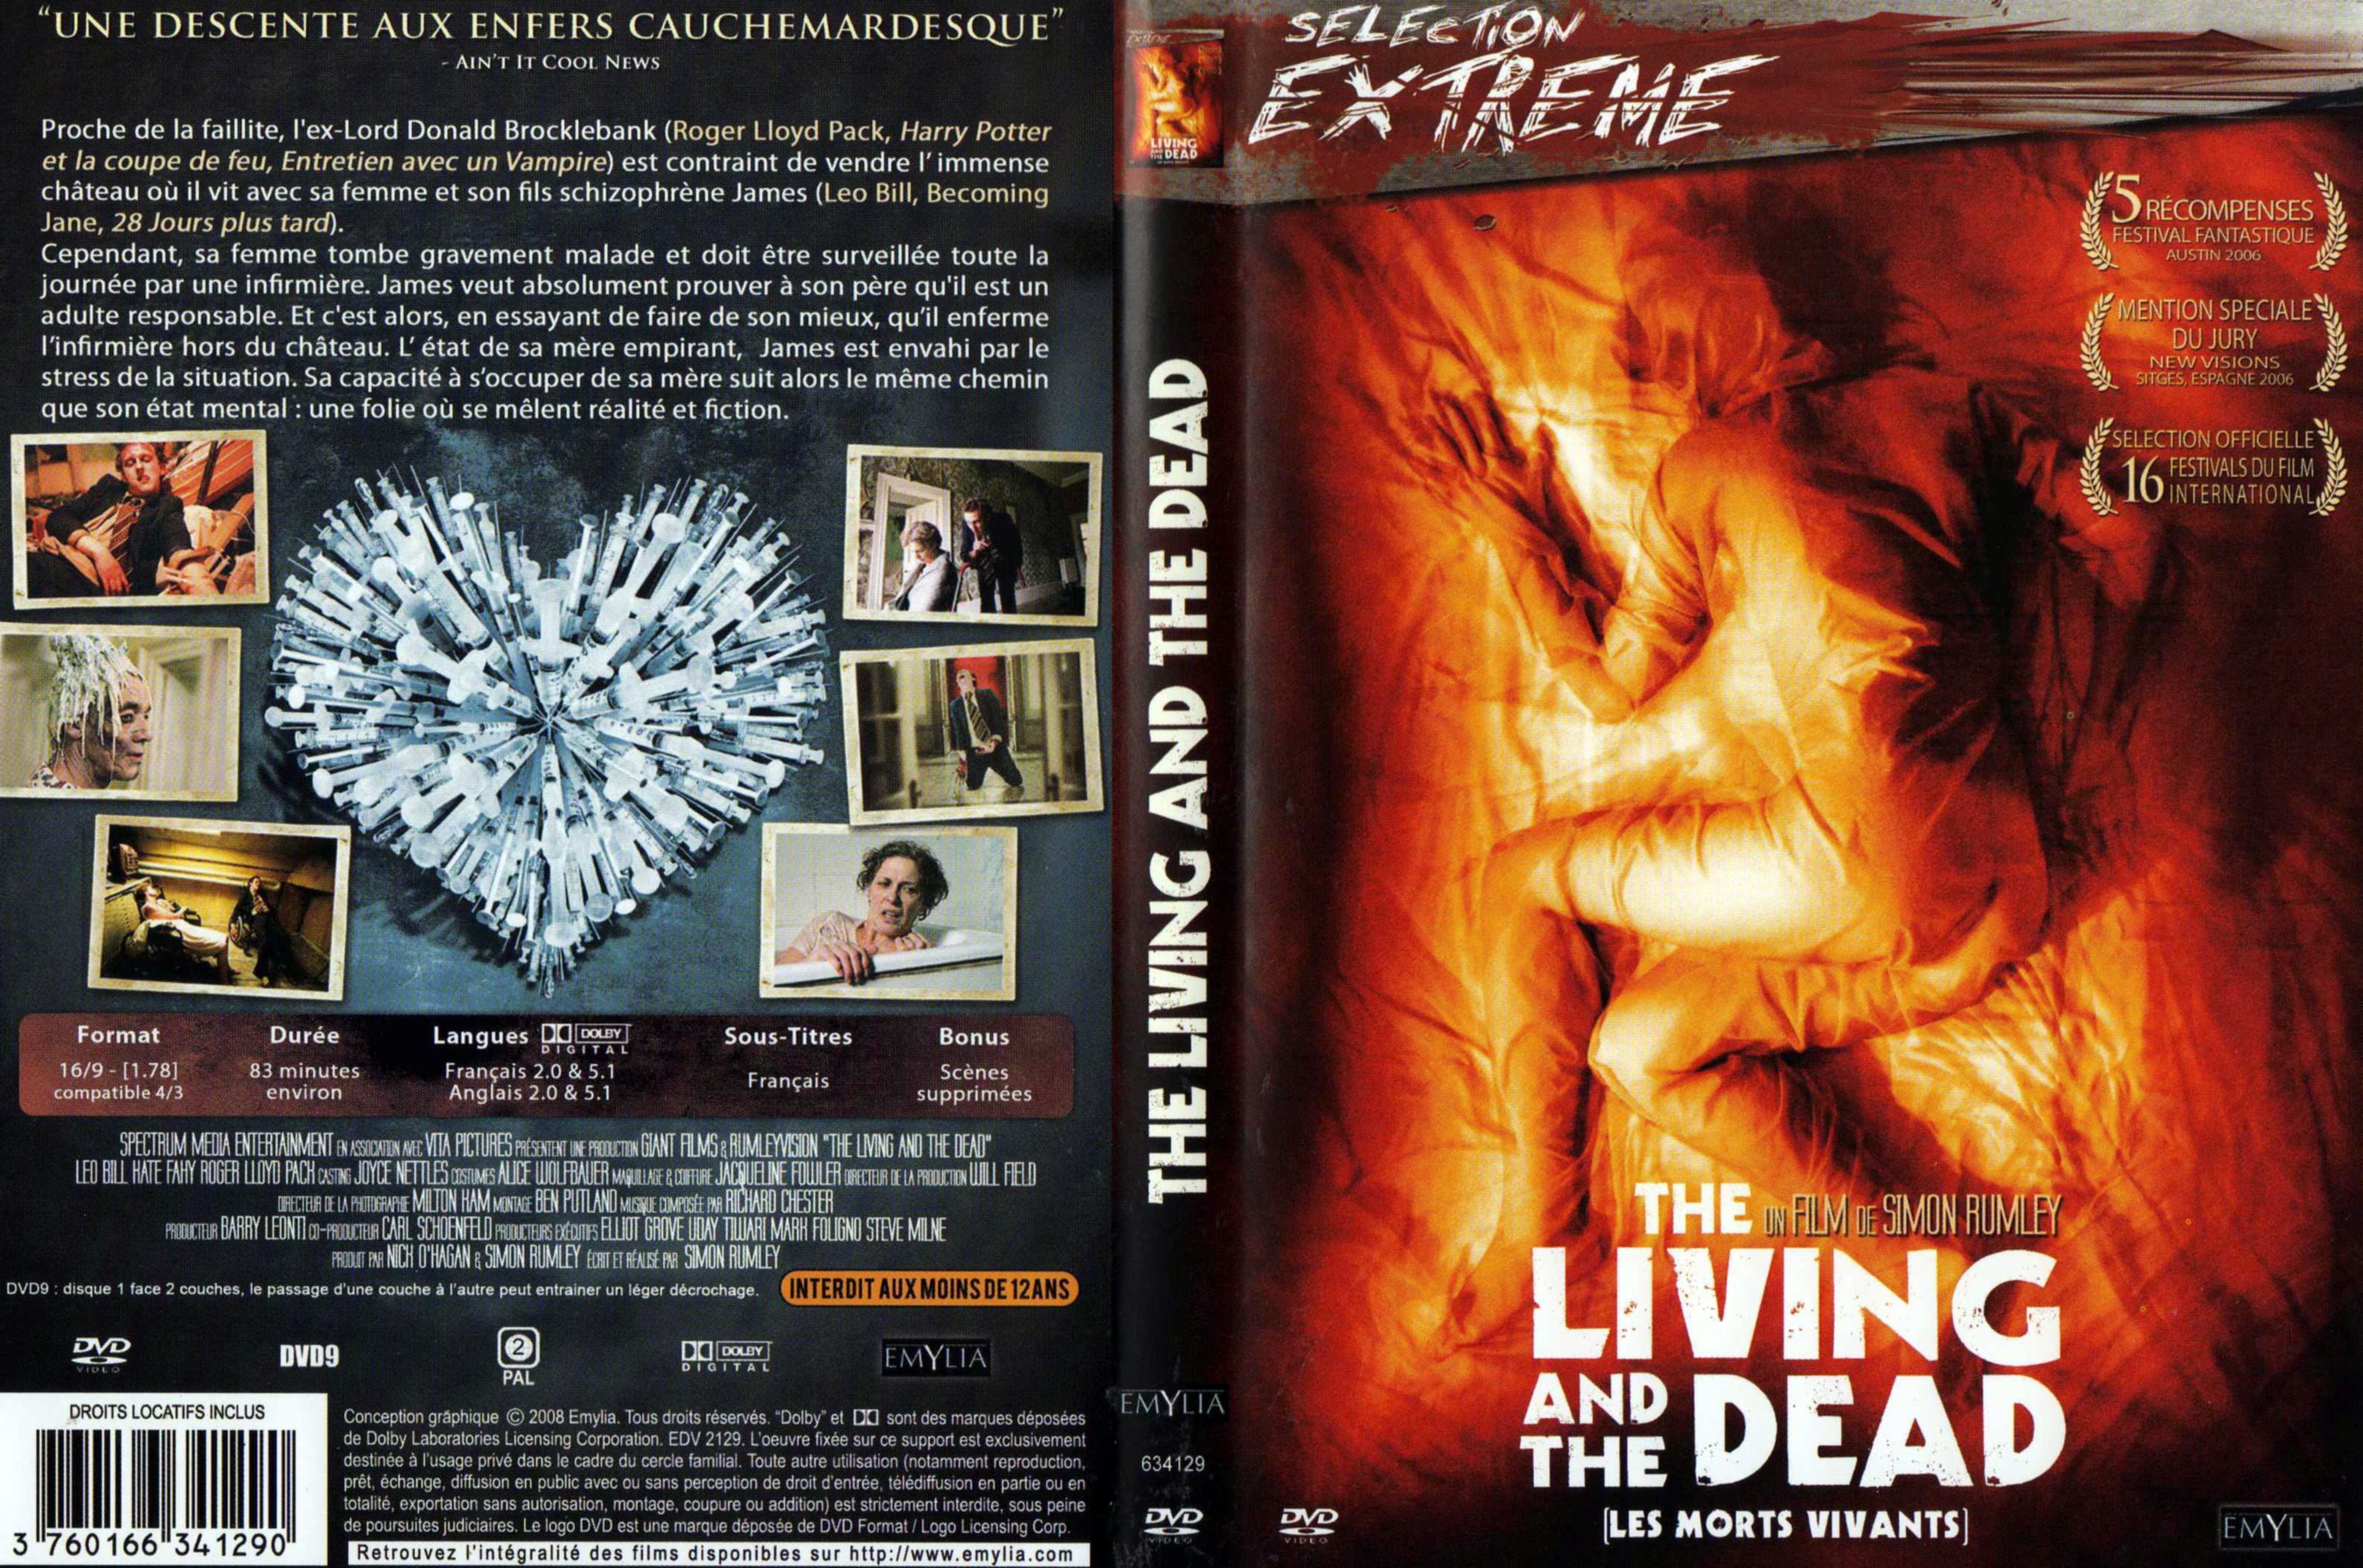 Jaquette DVD The living and the dead